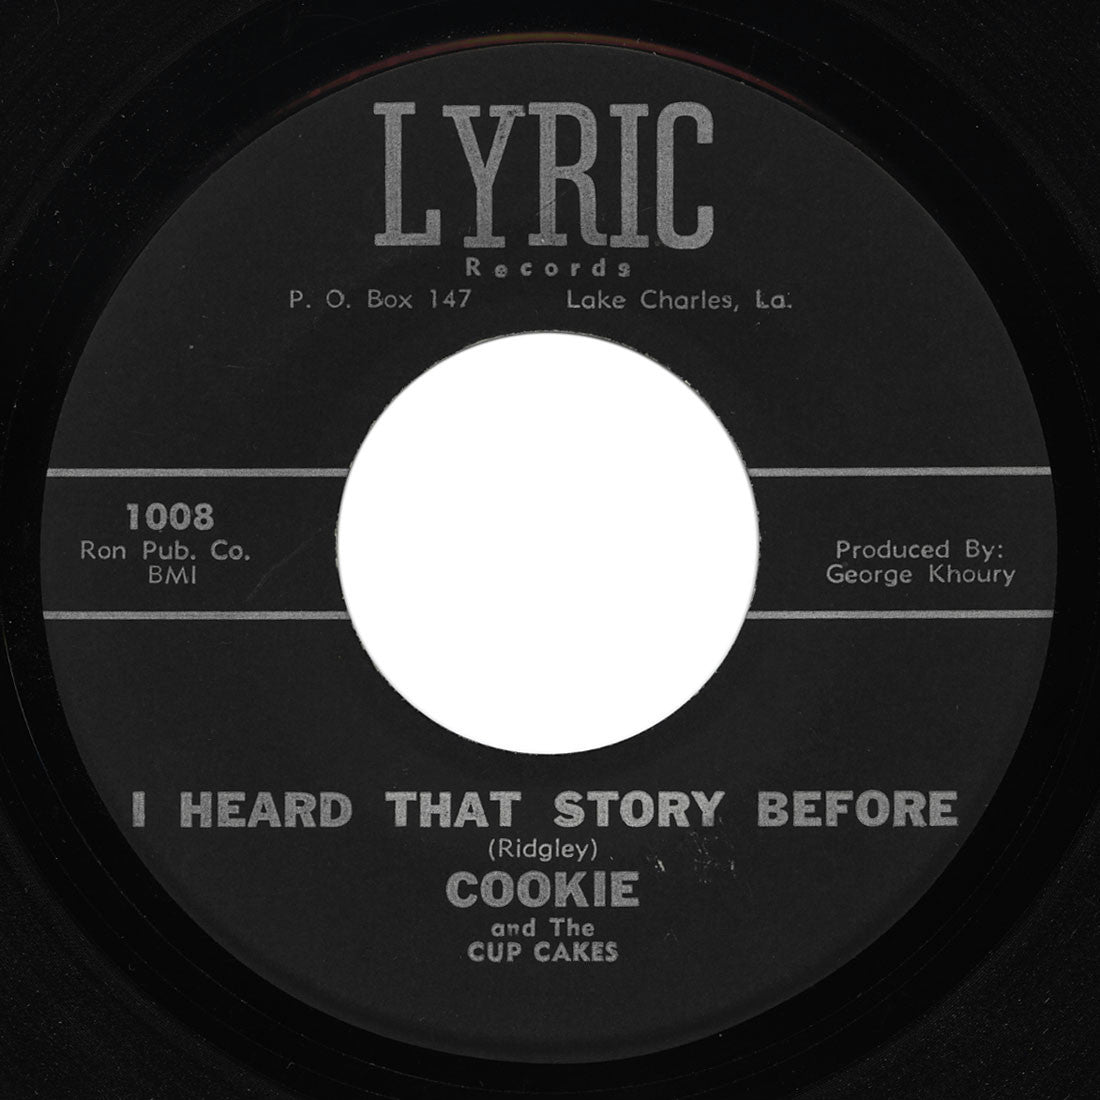 Cookie and the Cupcakes - All My Lovin’ Baby / I Heard That Story Before - Lyric